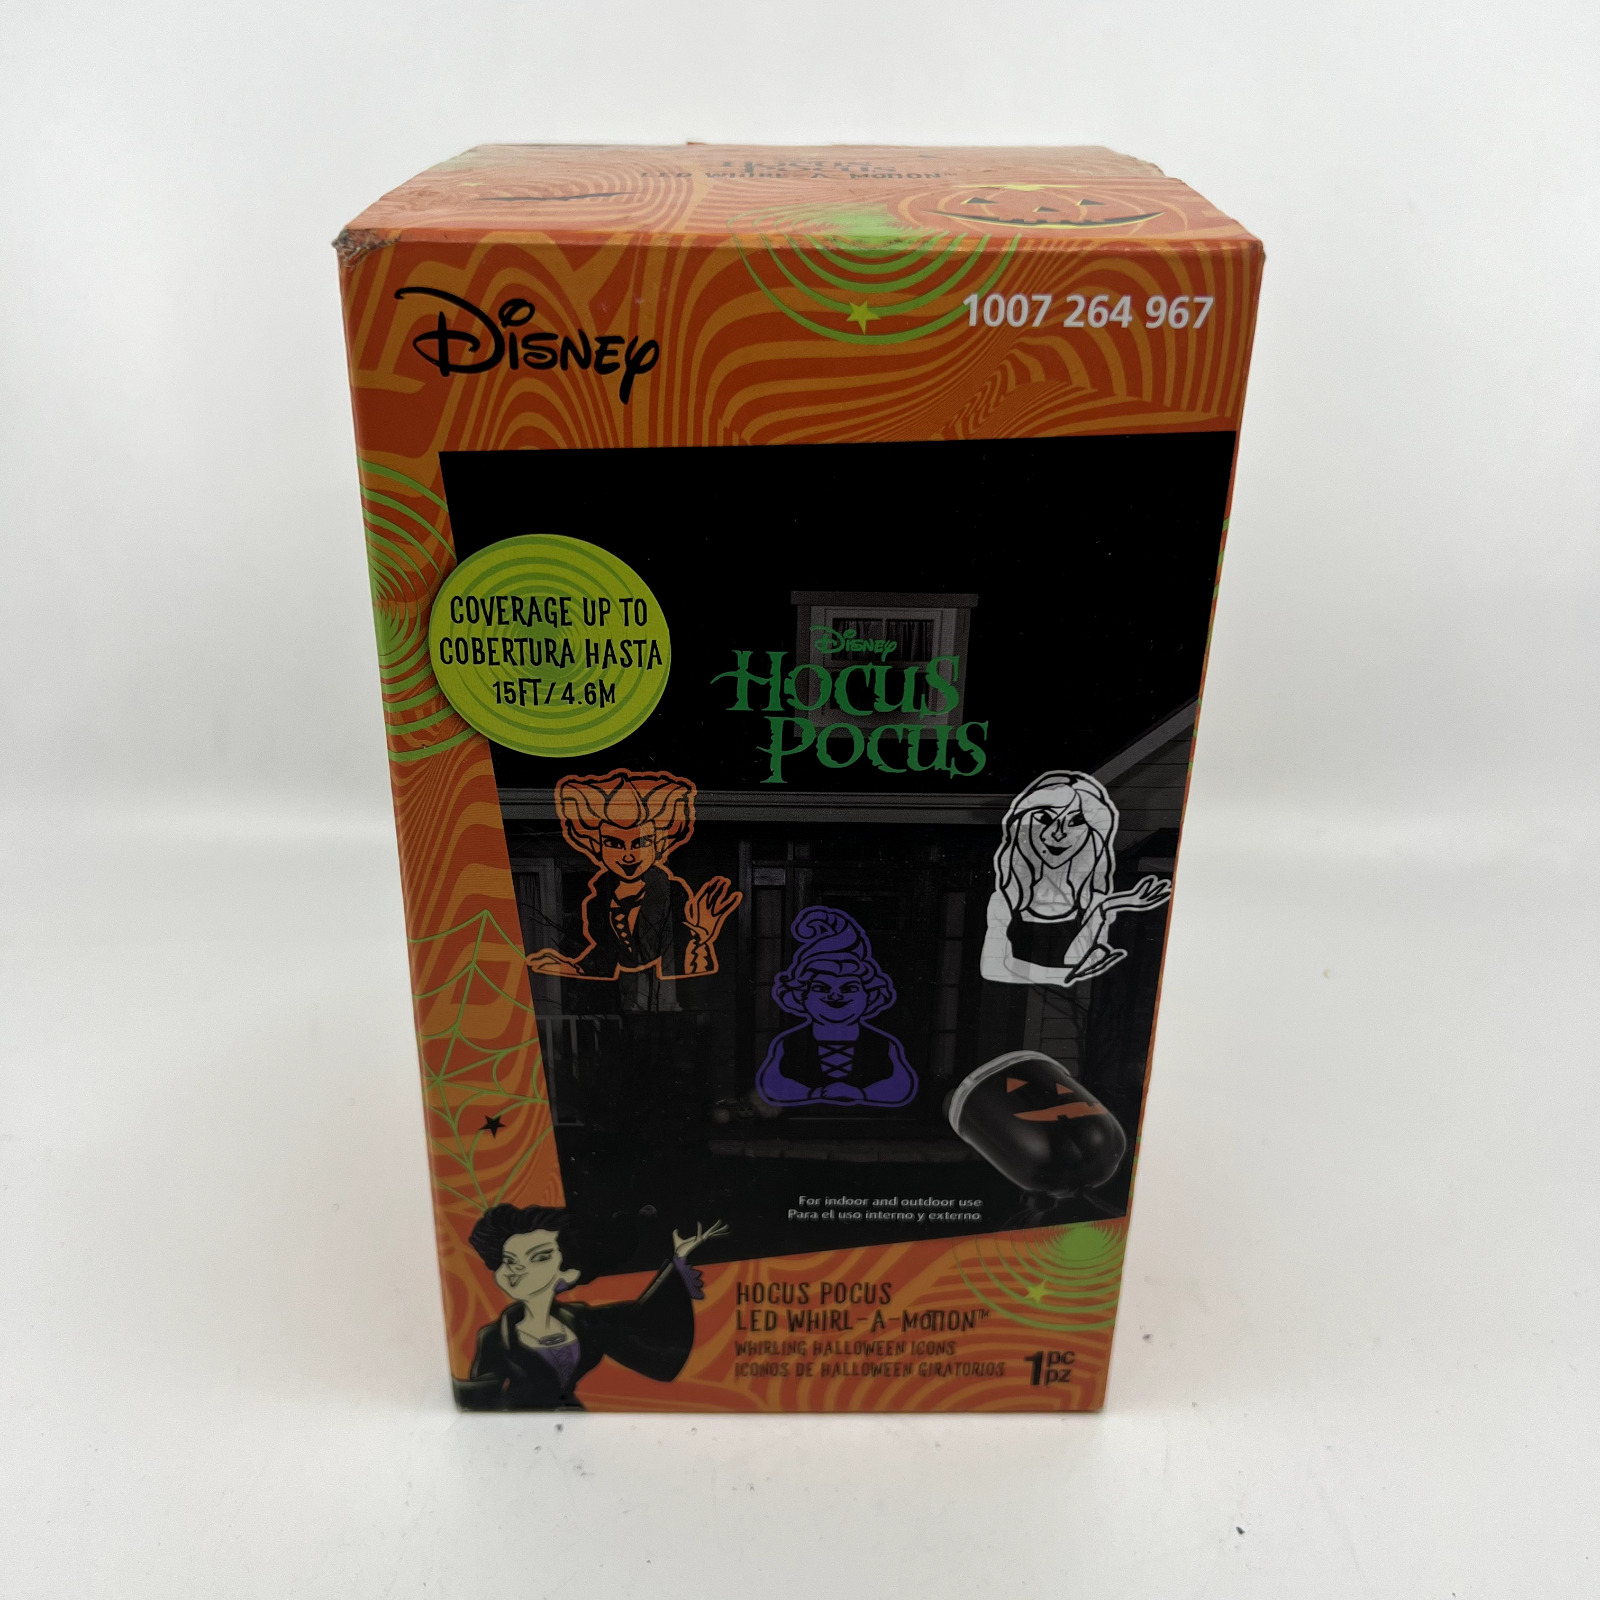 New Disney Hocus Pocus LED Light Show Whirl-A-Motion Projector Halloween